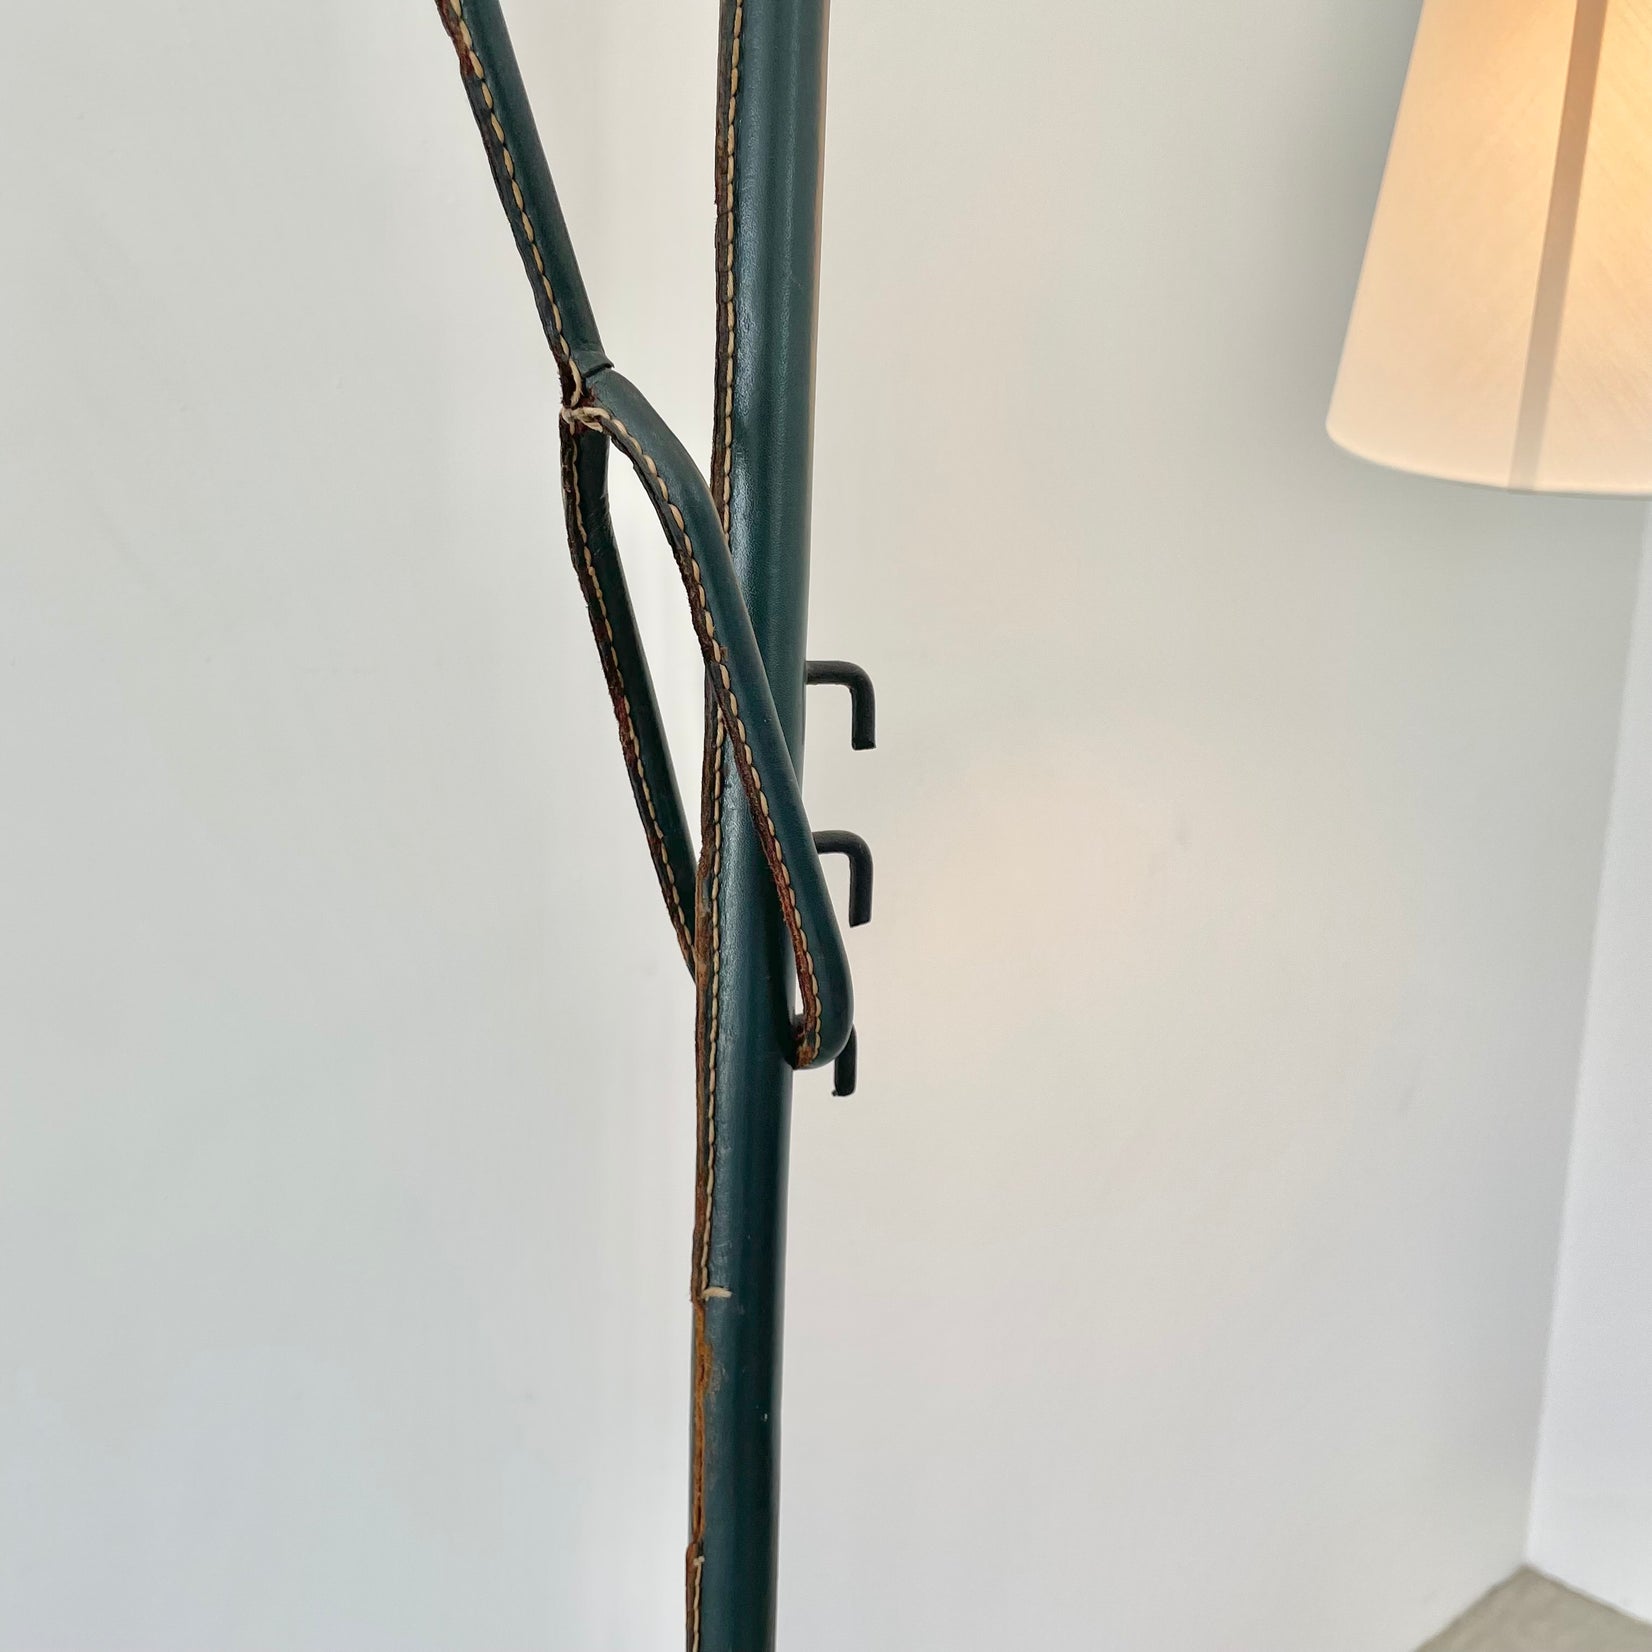 Jacques Adnet Adjustable Green Leather Floor Lamp, 1950s France